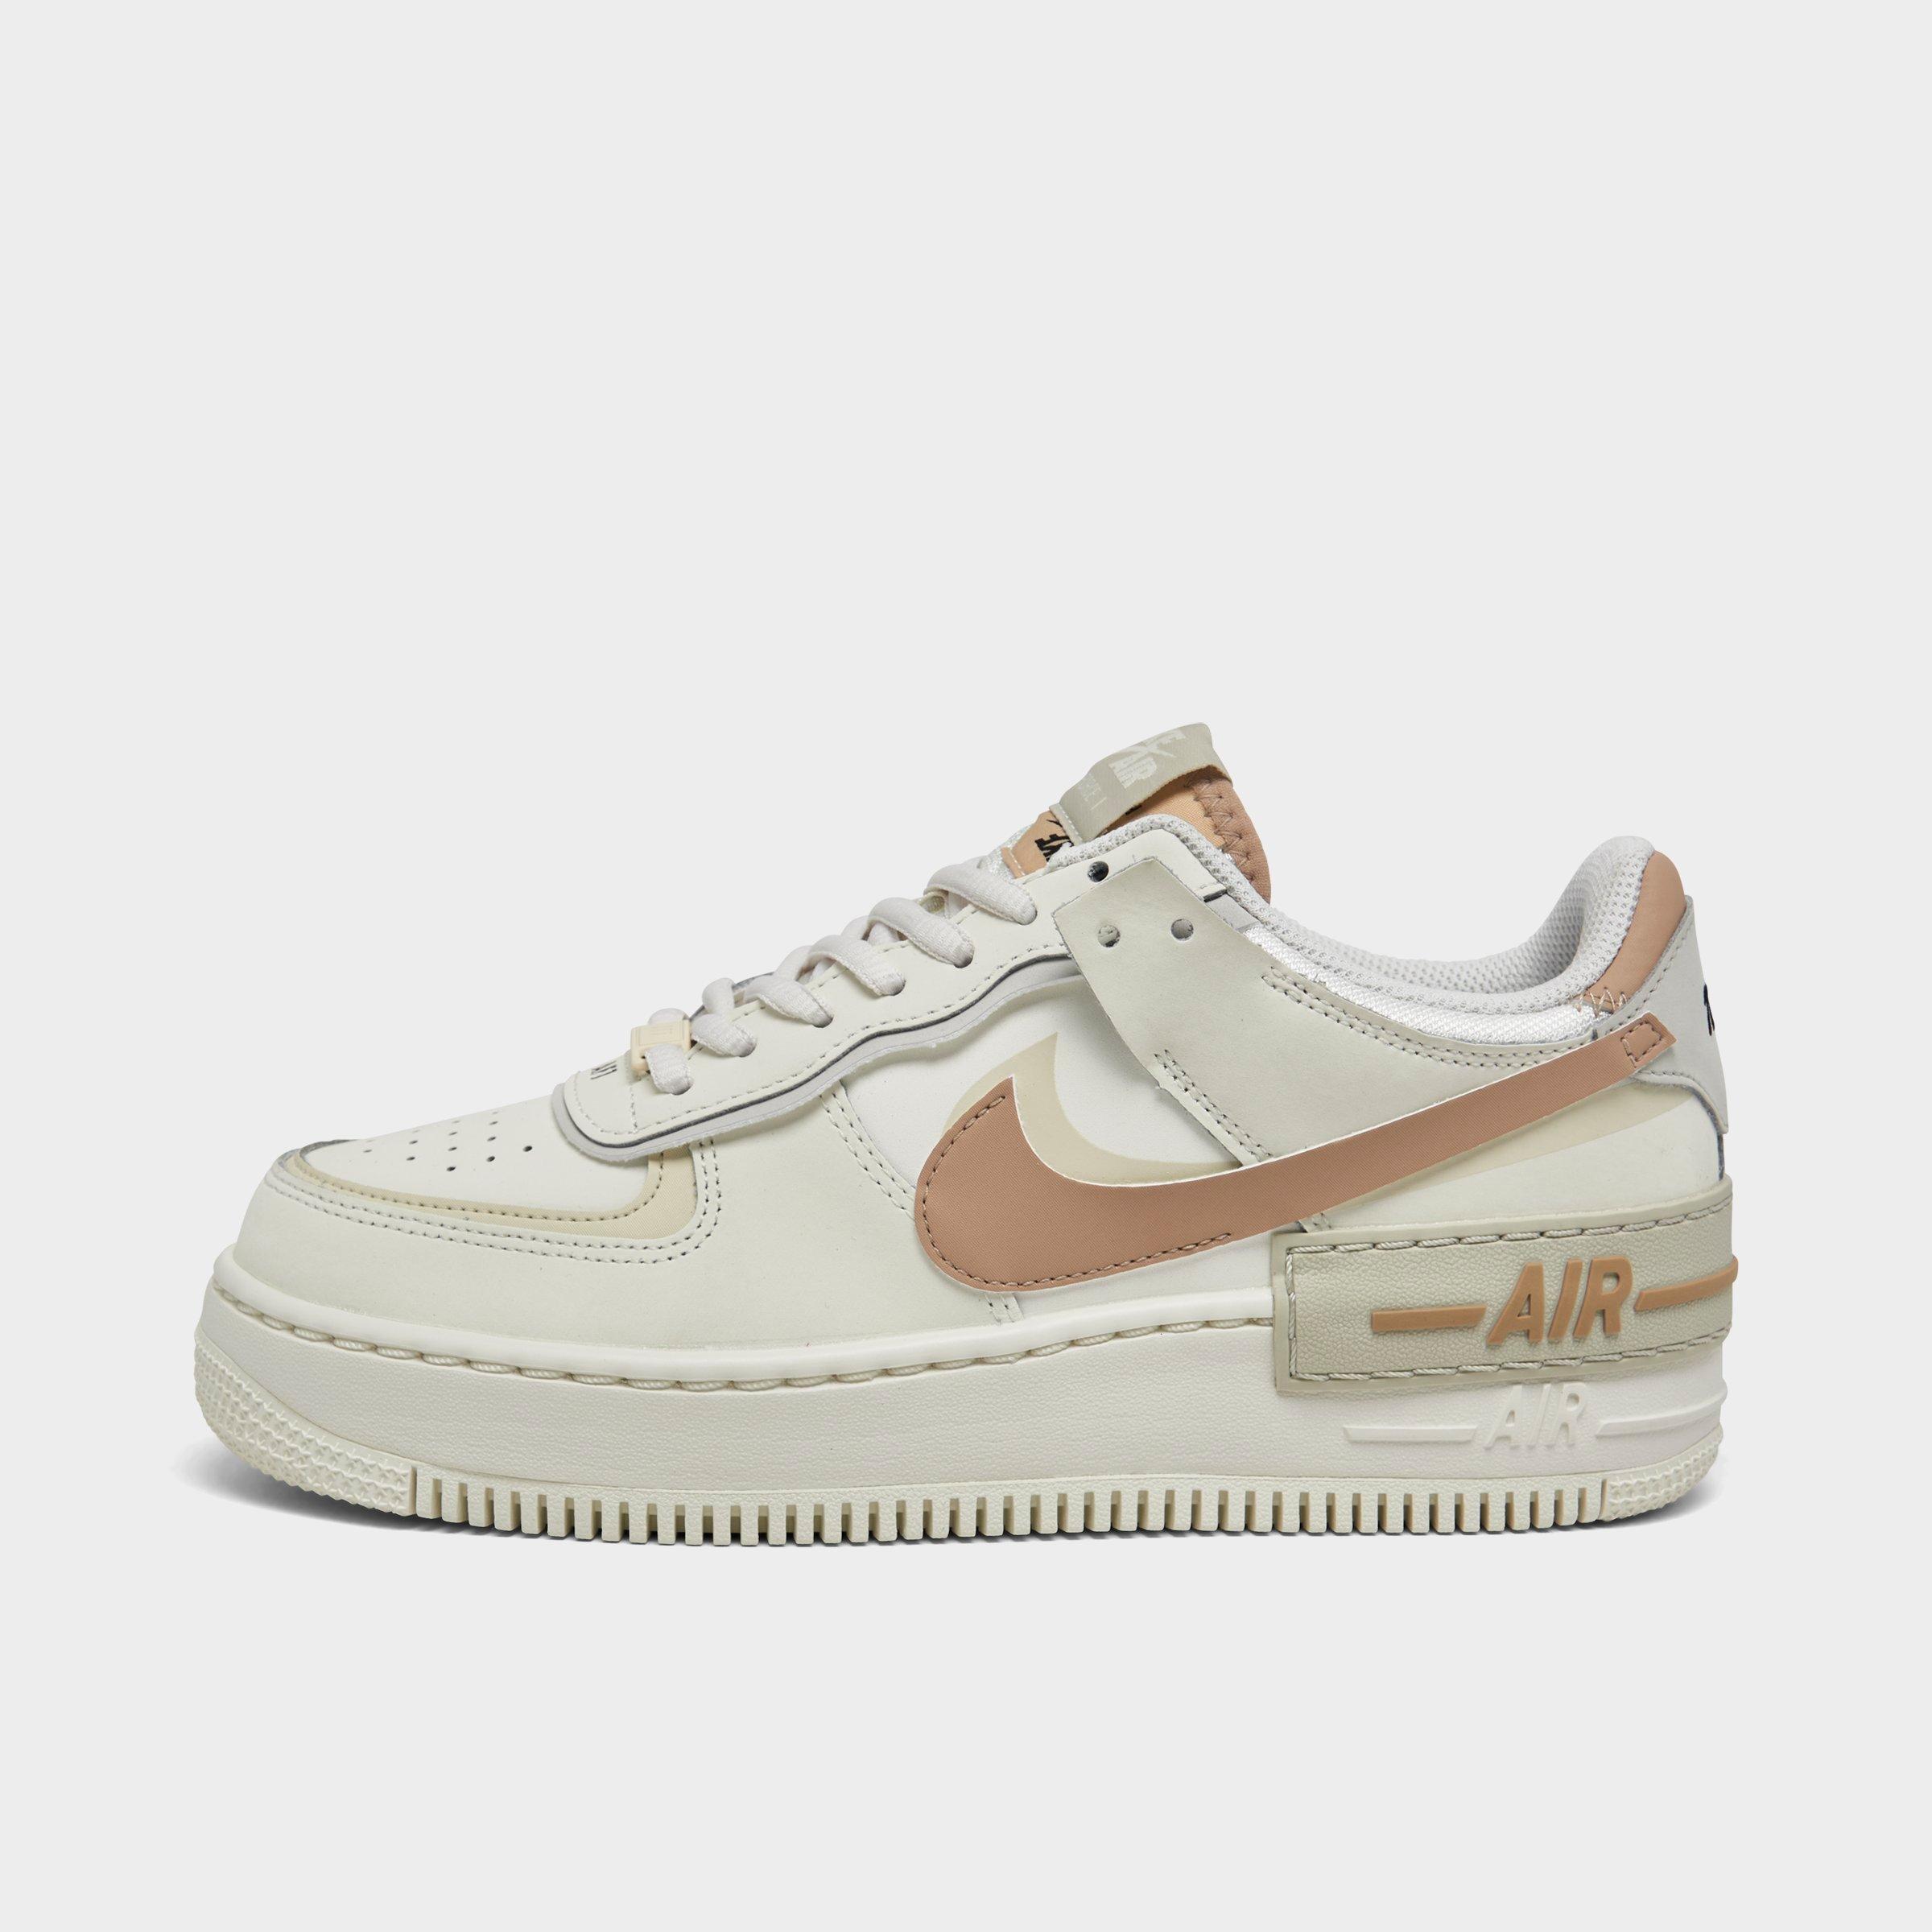 Nike AF1 Shadow Barely Green/Crimson Tint Sneakers - Farfetch